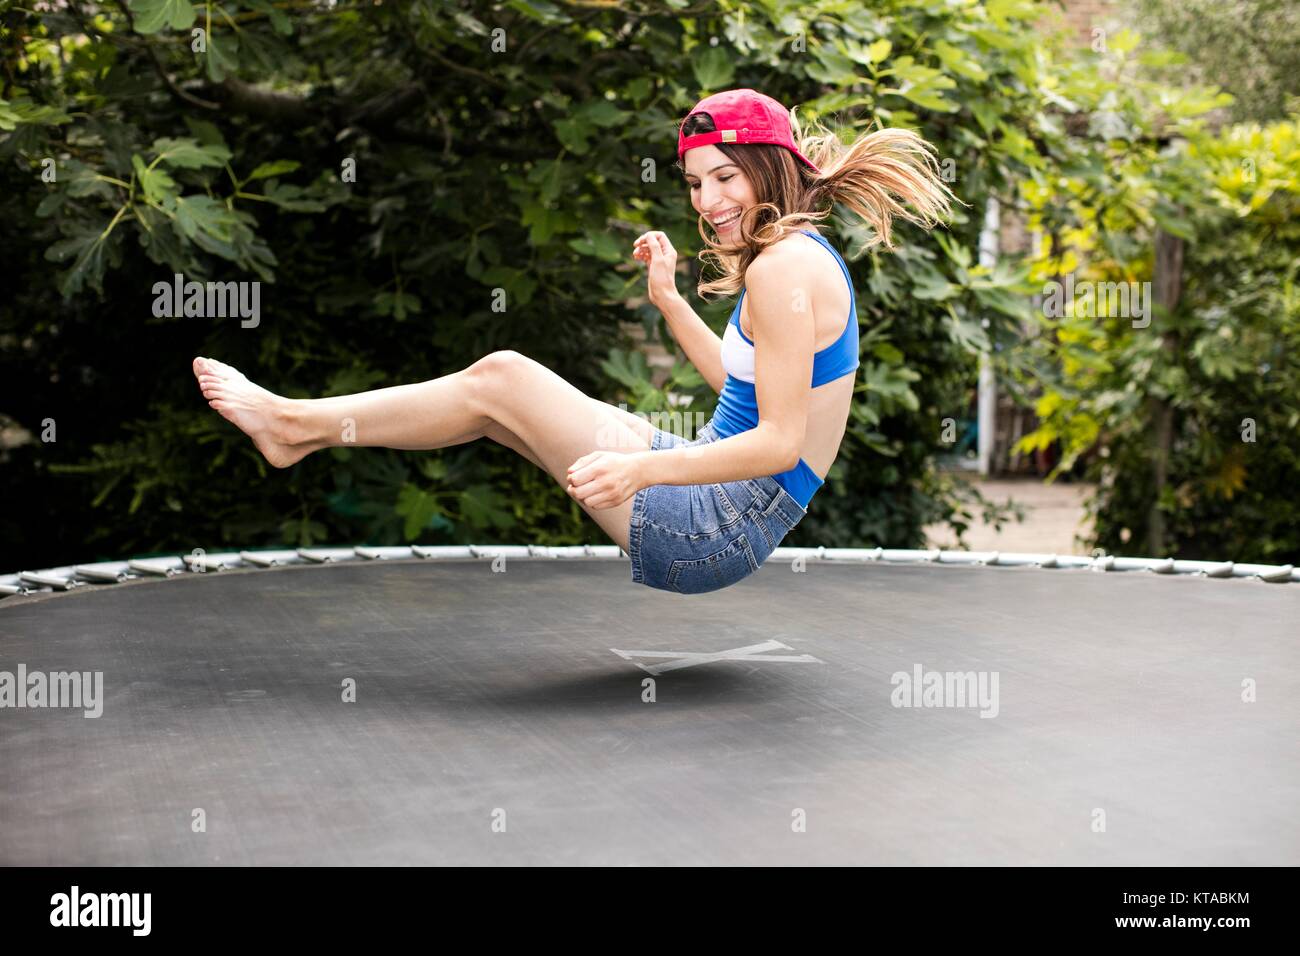 Young woman bouncing on trampoline. Stock Photo